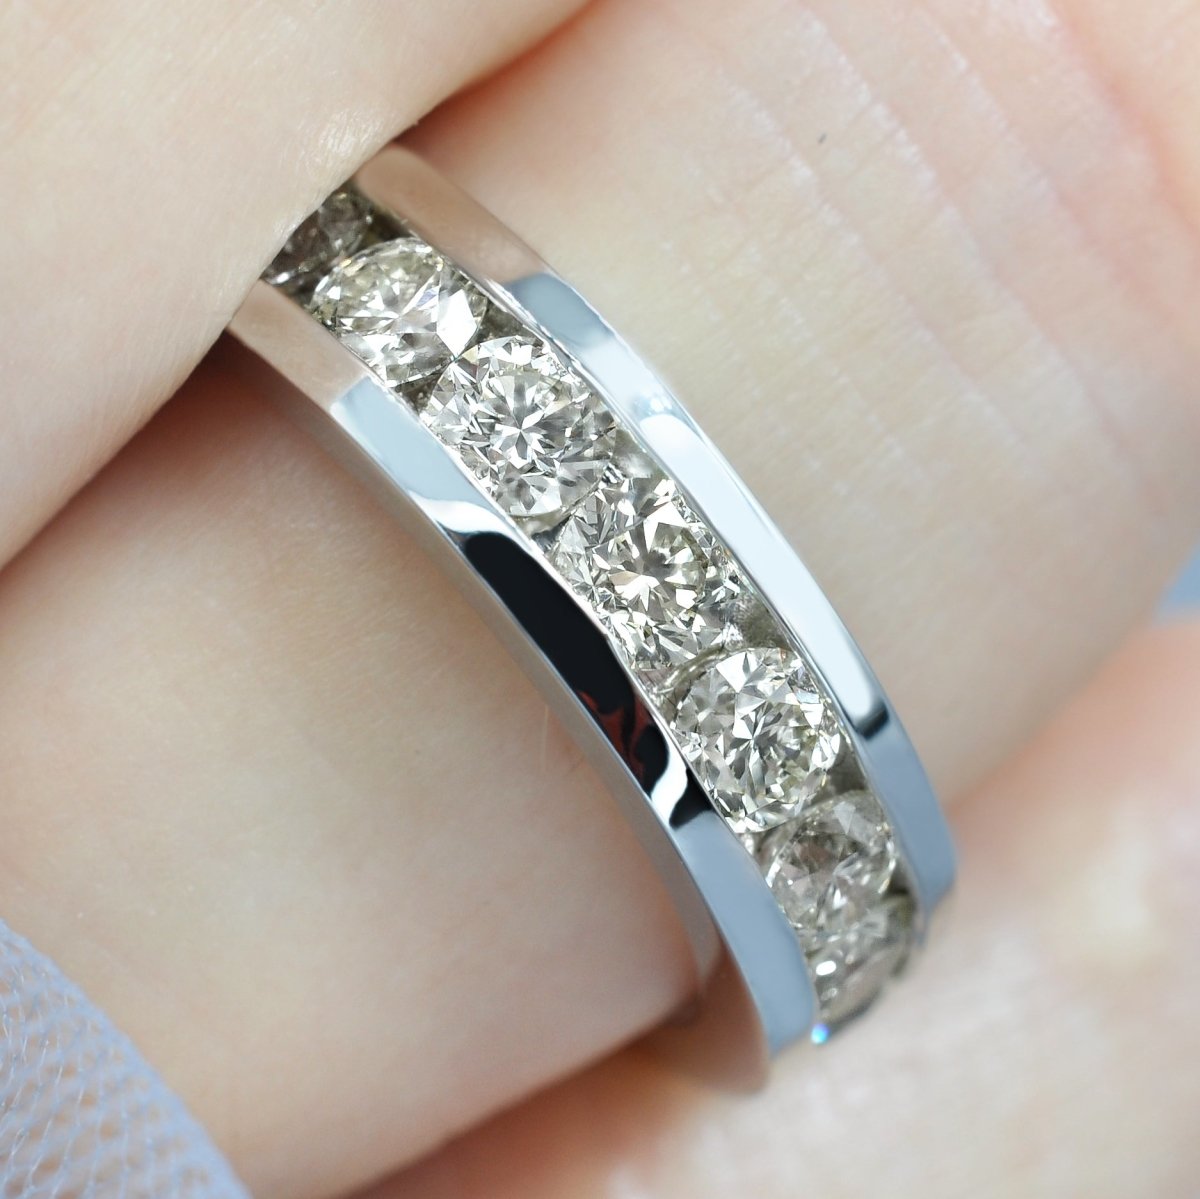 Certified 4.00 CT Round Cut Diamond Eternity Ring in 18KT White Gold - Primestyle.com